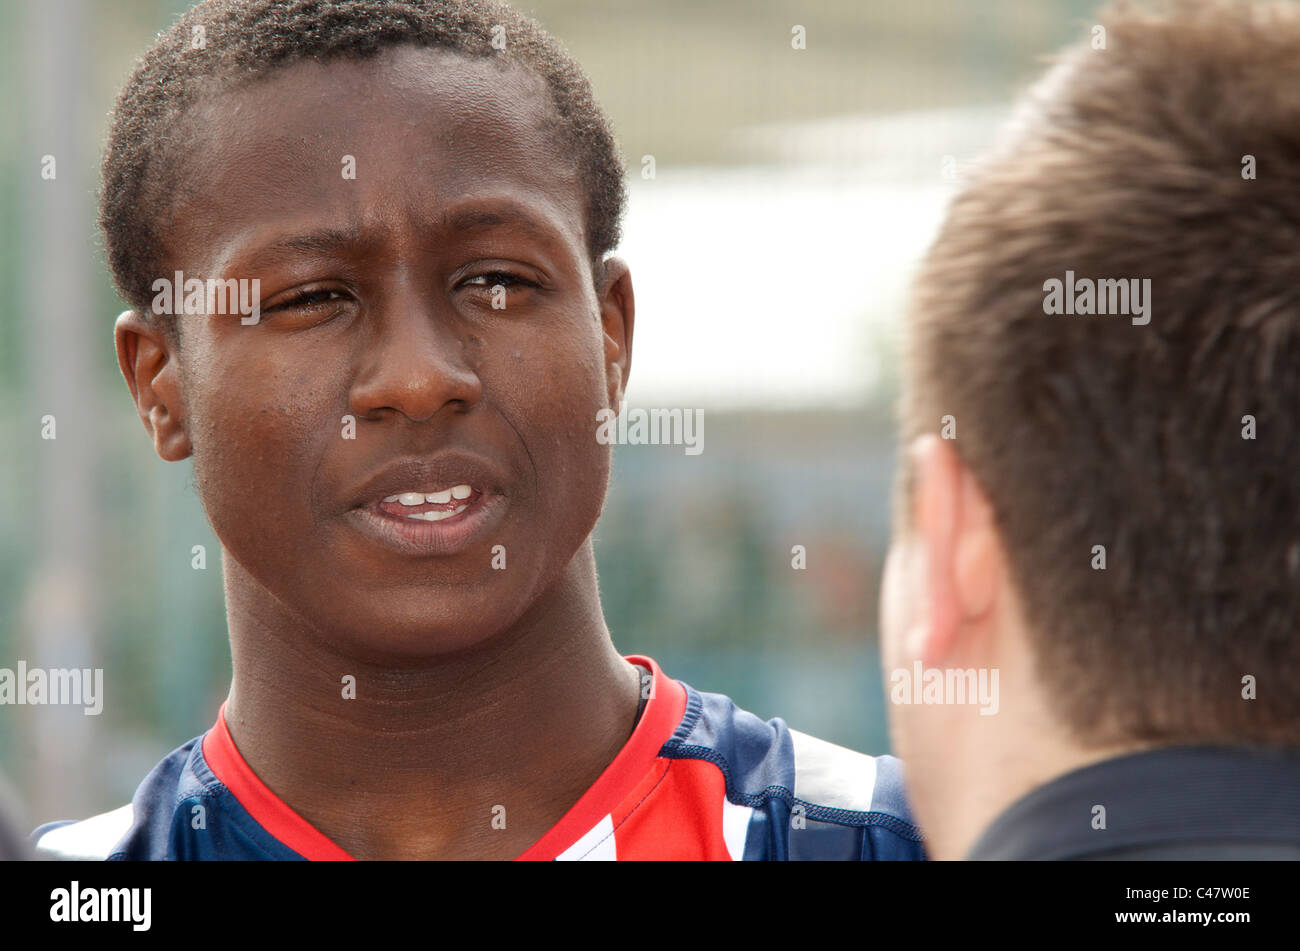 ola abidosun being interviewed by channel 4 at paralympic world cup, manchester, may 2011 Stock Photo